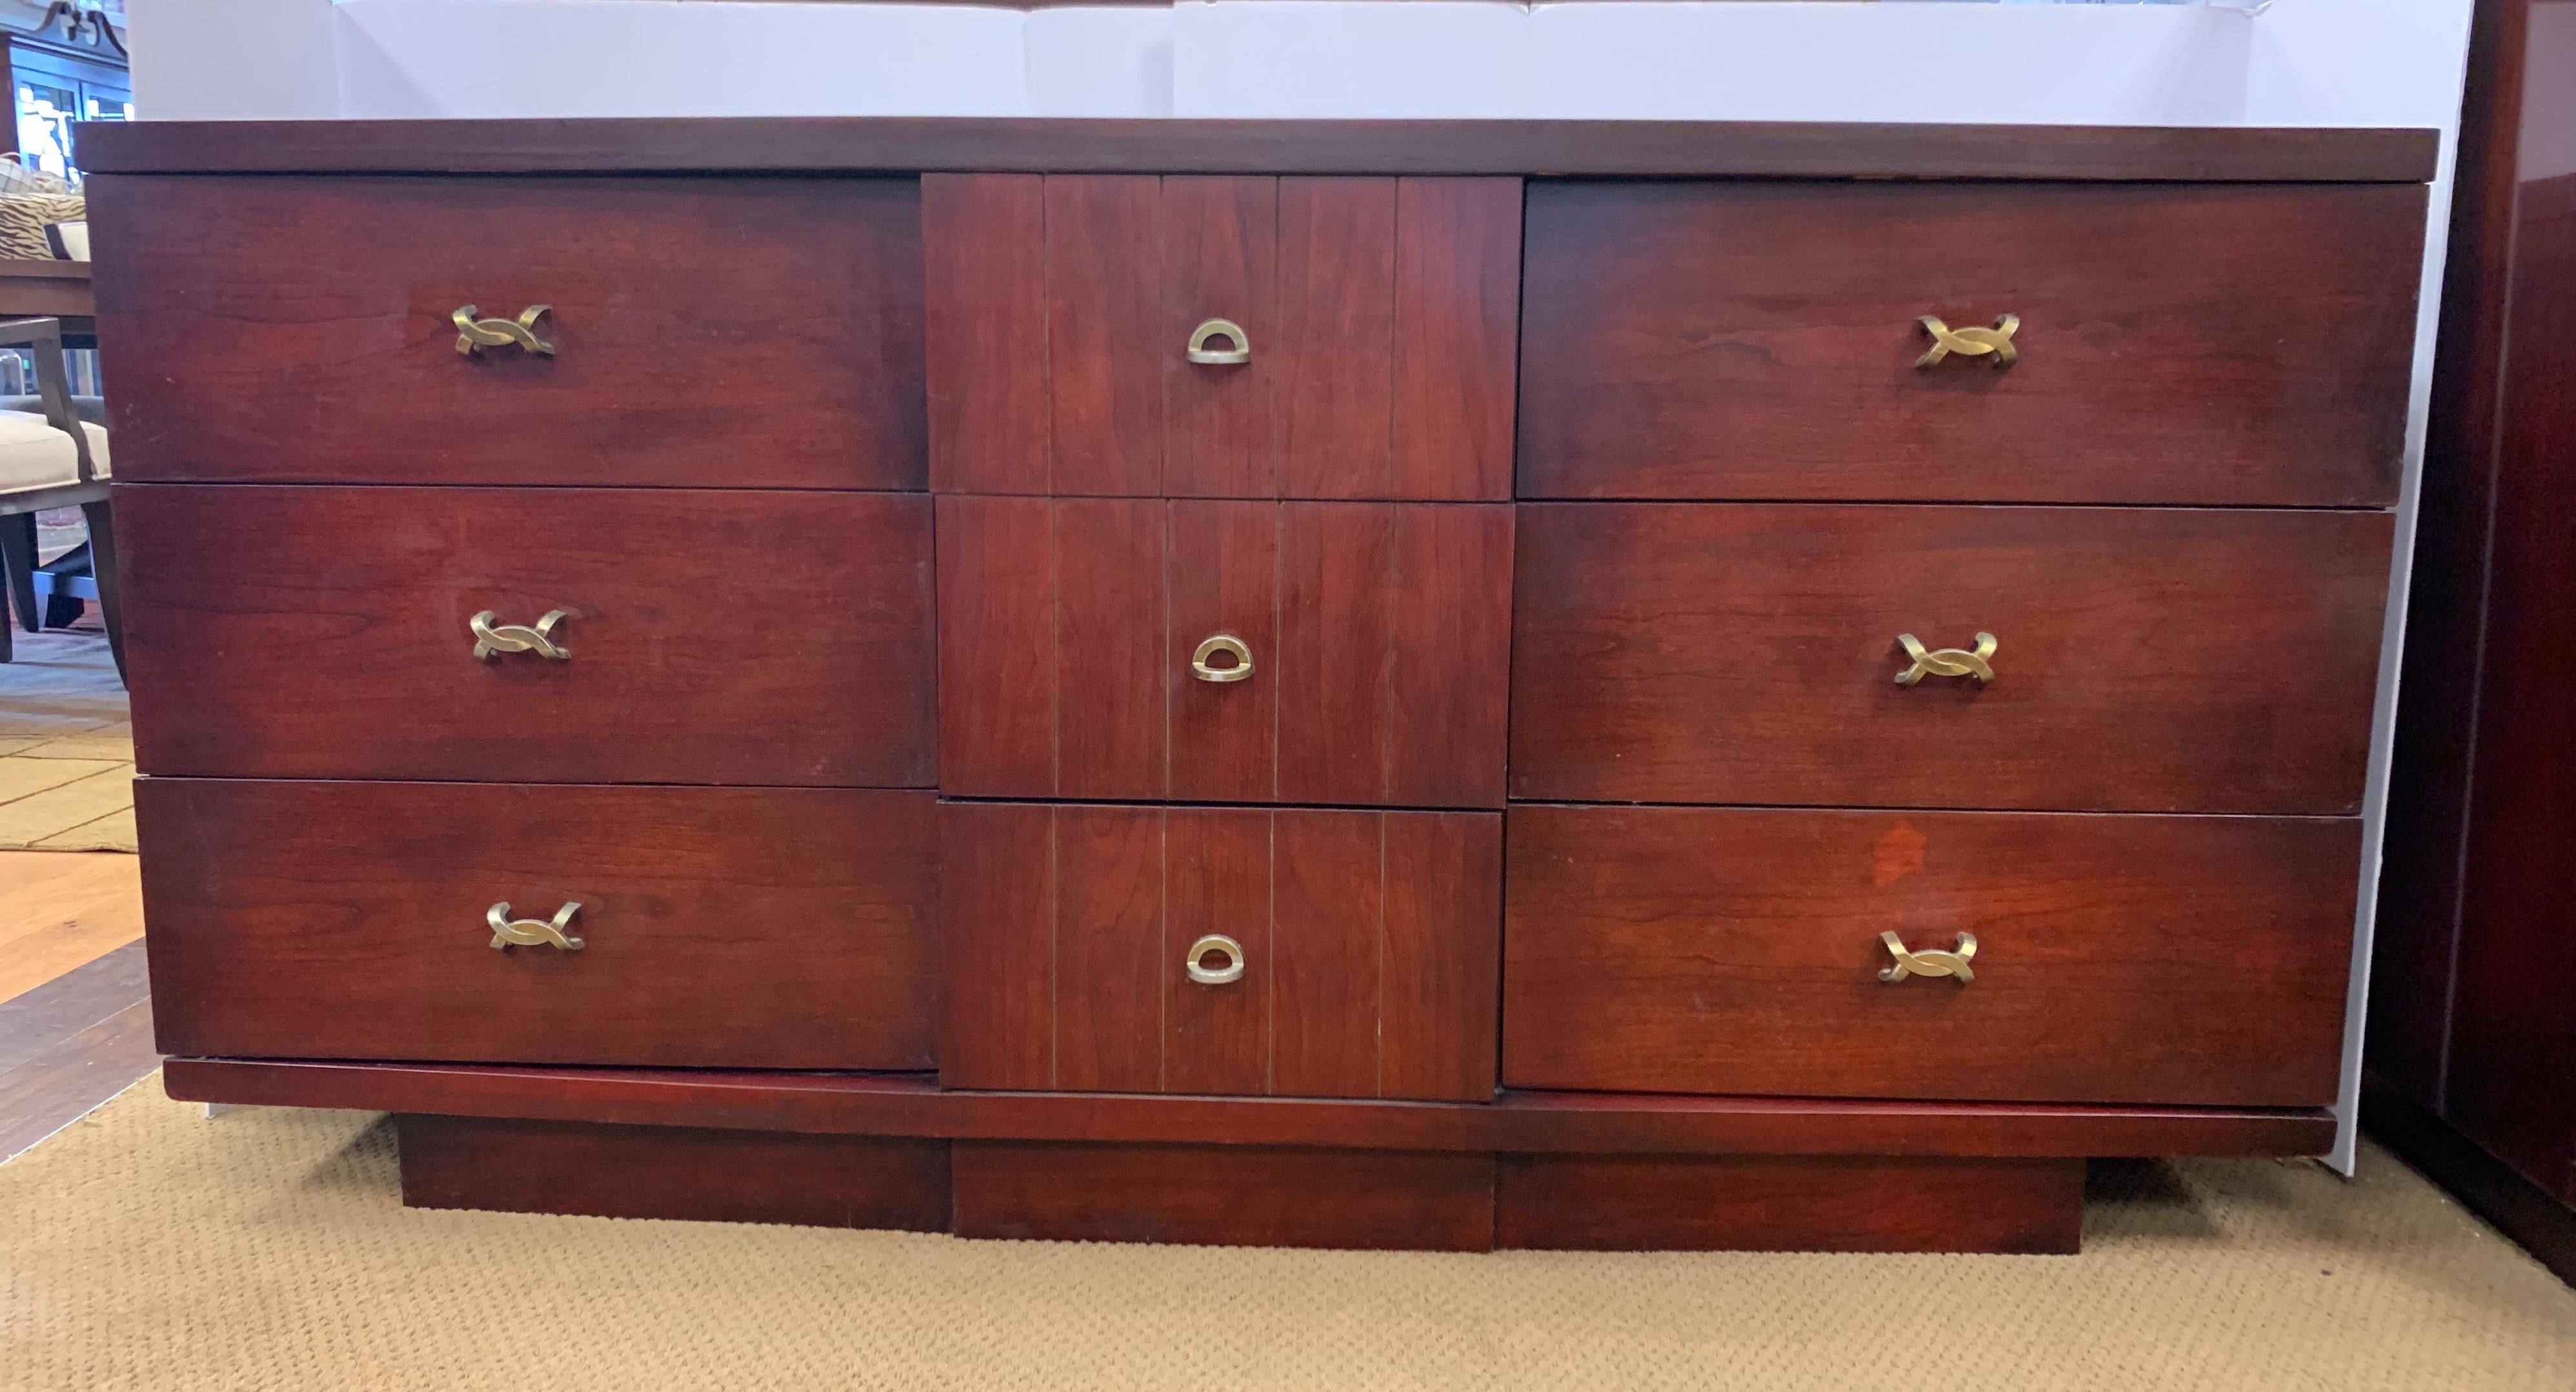 Iconic, signed midcentury dresser from Kent Coffey. This is part of the coveted Titan line. Made in the USA and featuring nine spacious drawers, all adorned with sought after original drawer pulls. 